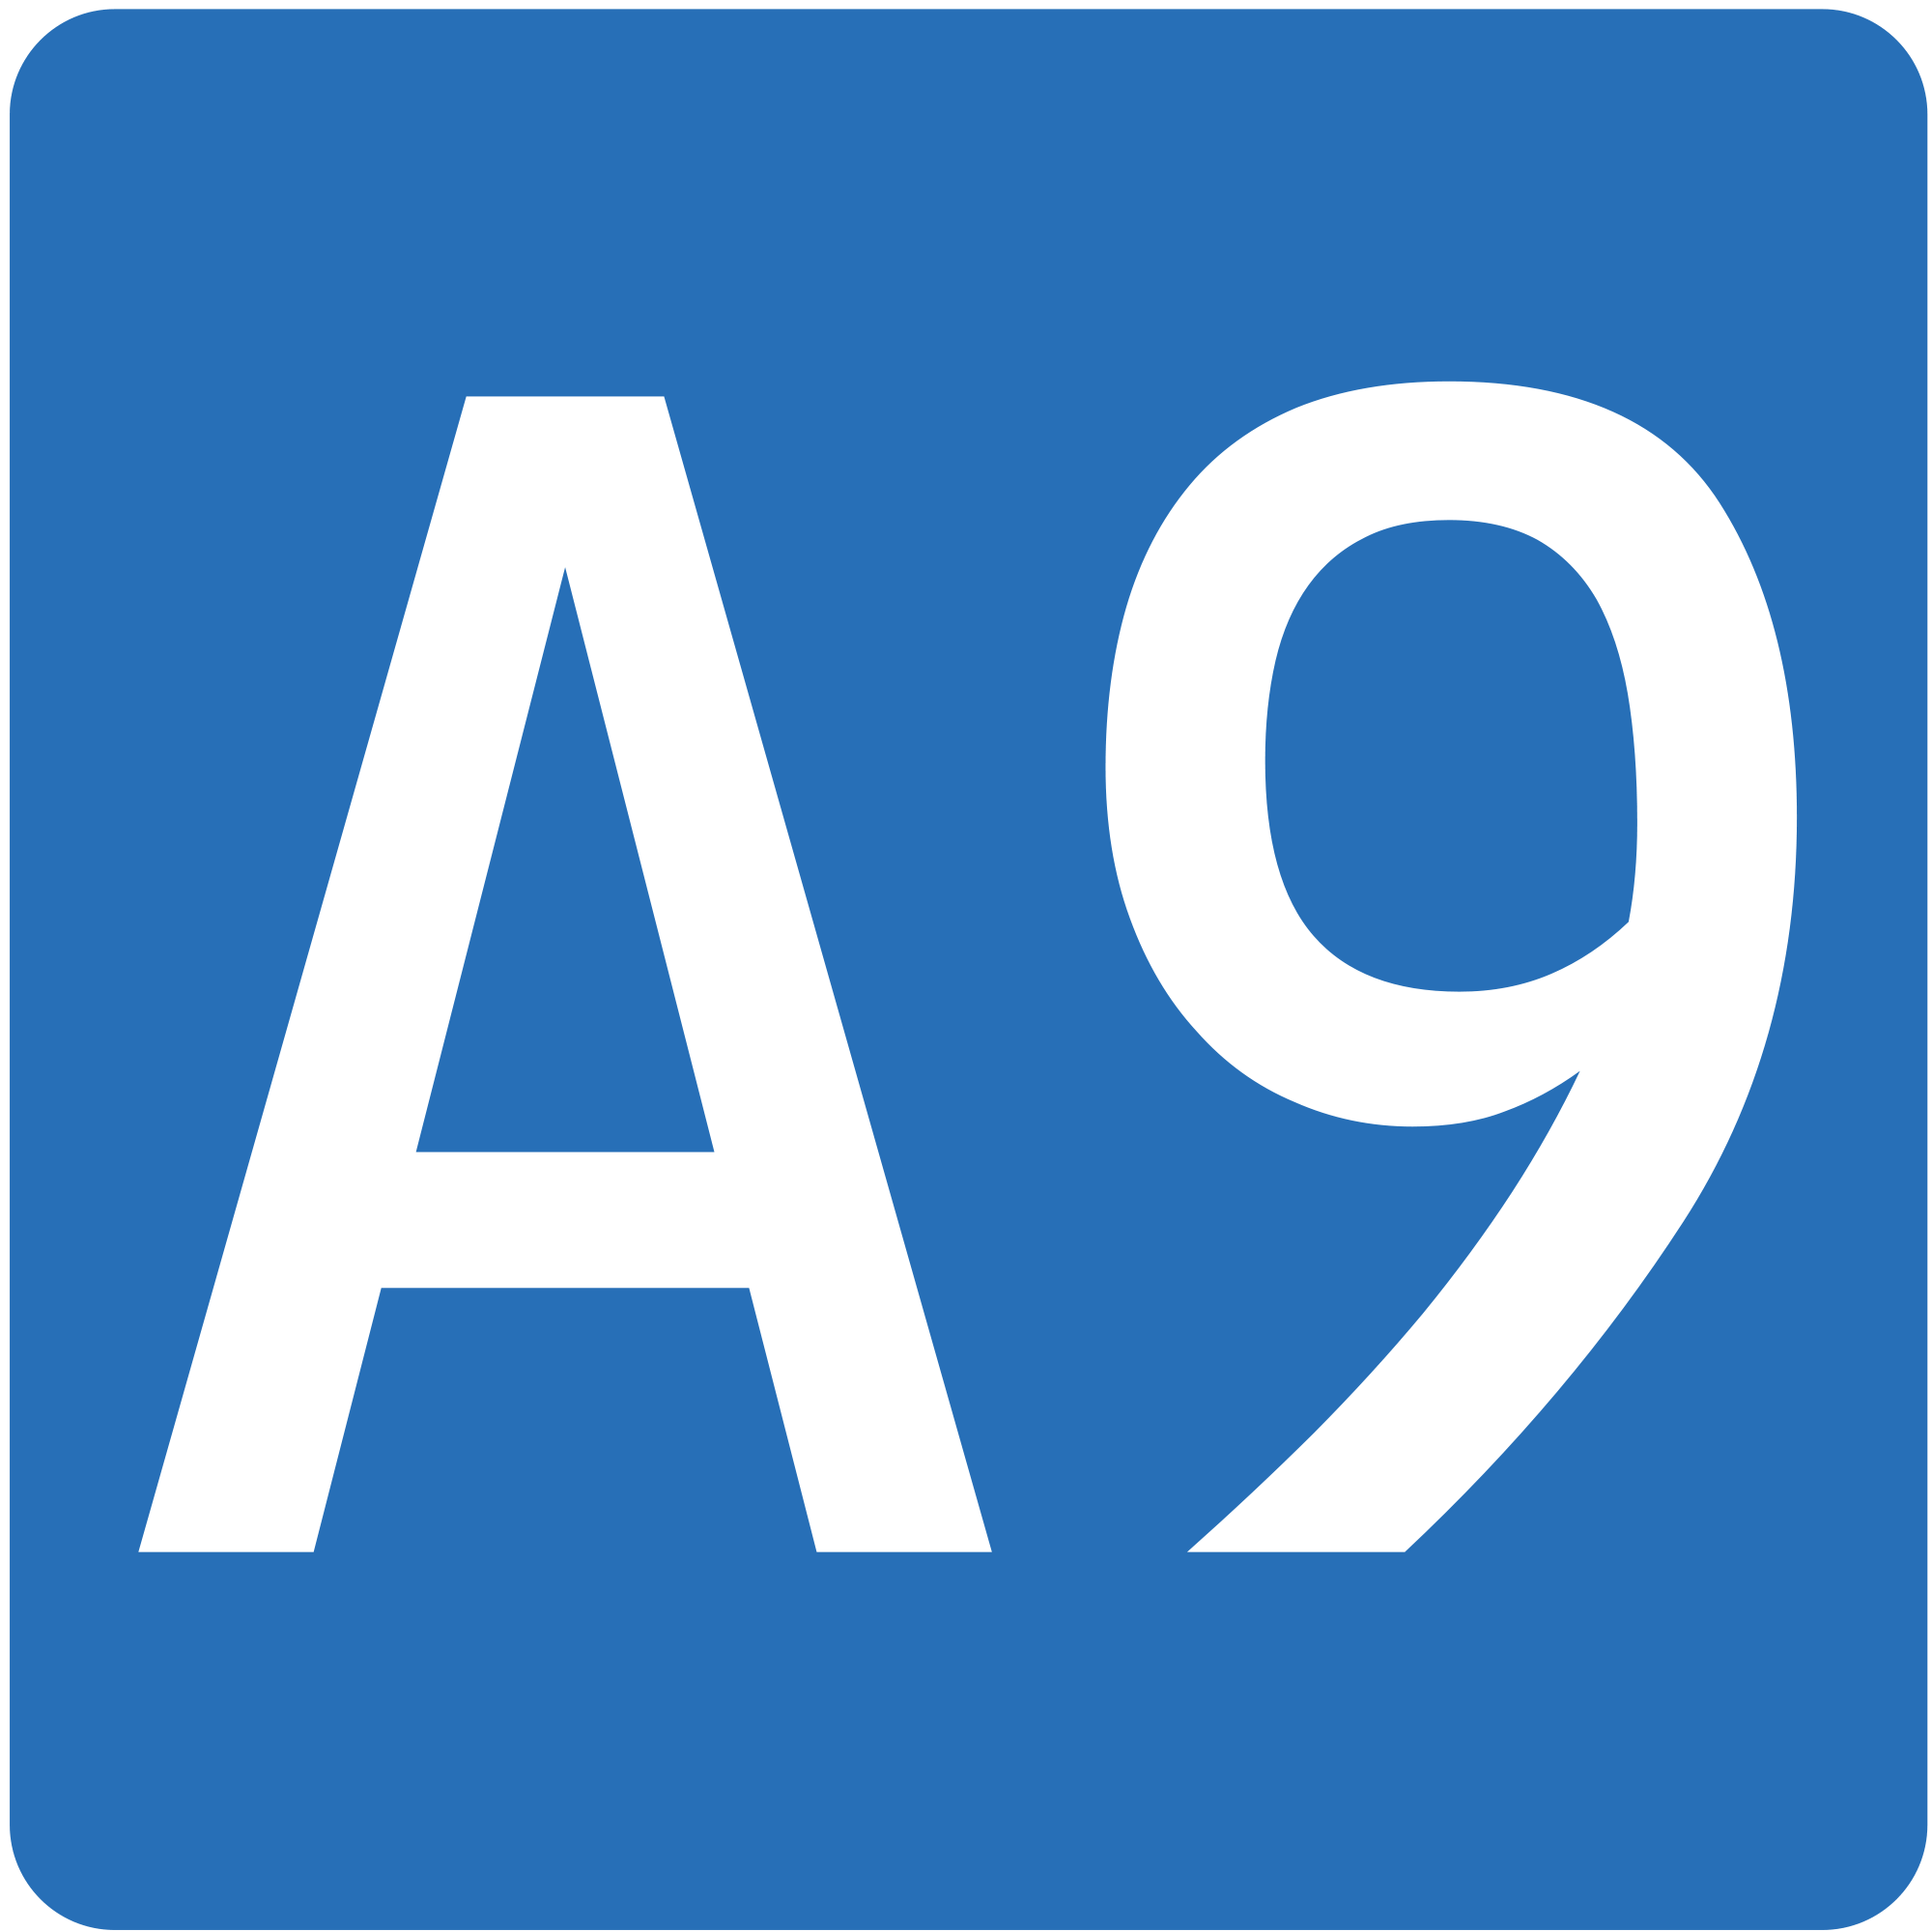 A9 Logo - File:A9-AT.svg - Wikimedia Commons